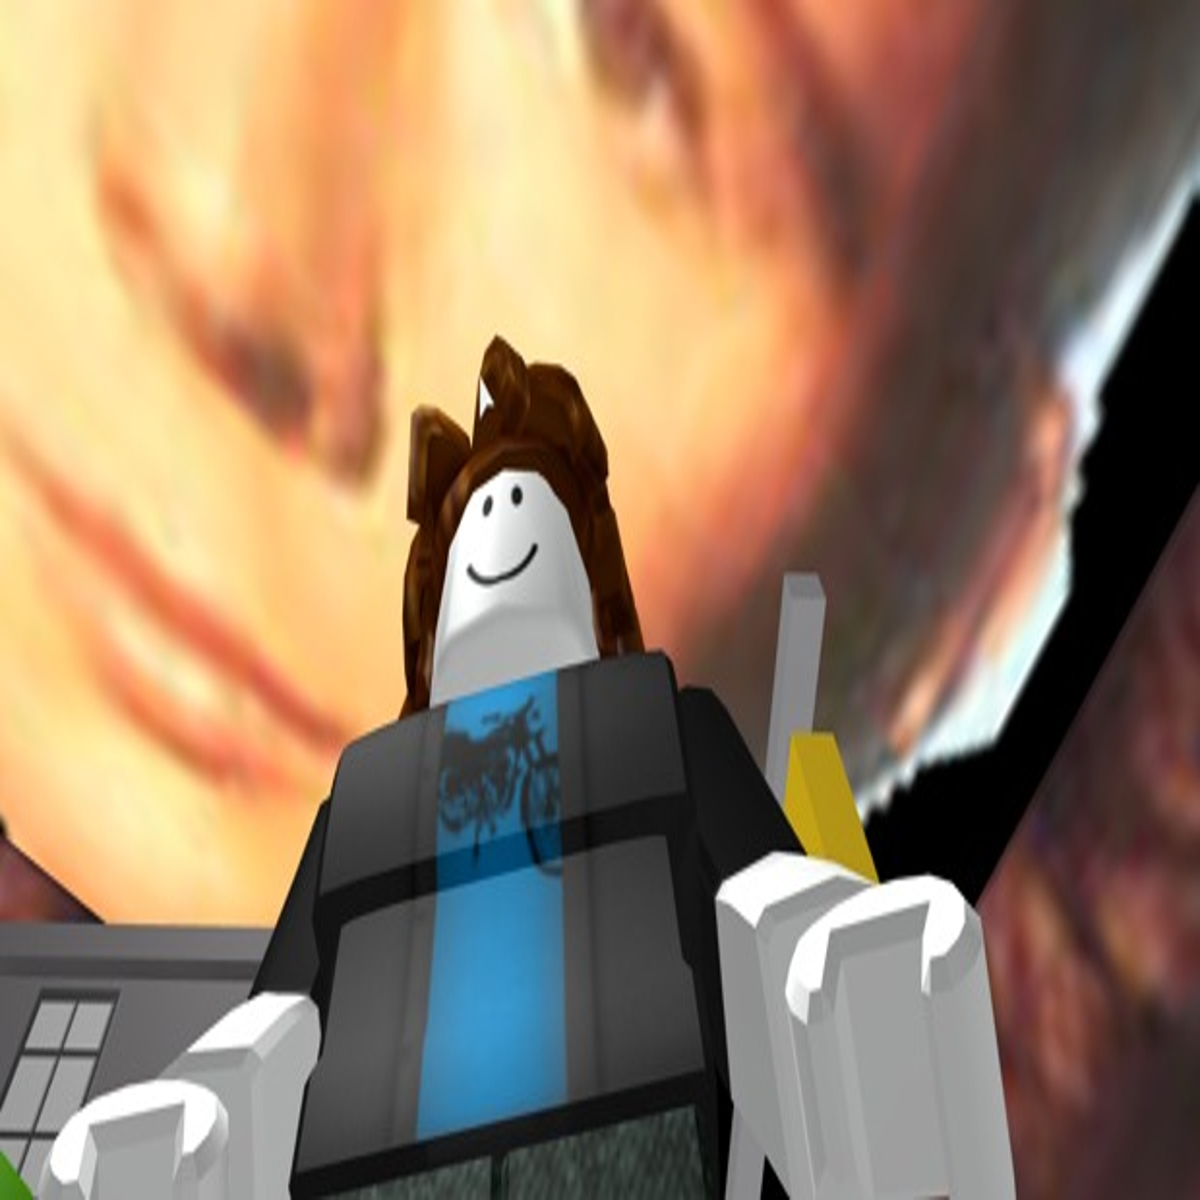 A roblox bacon hair playing on a gaming pc